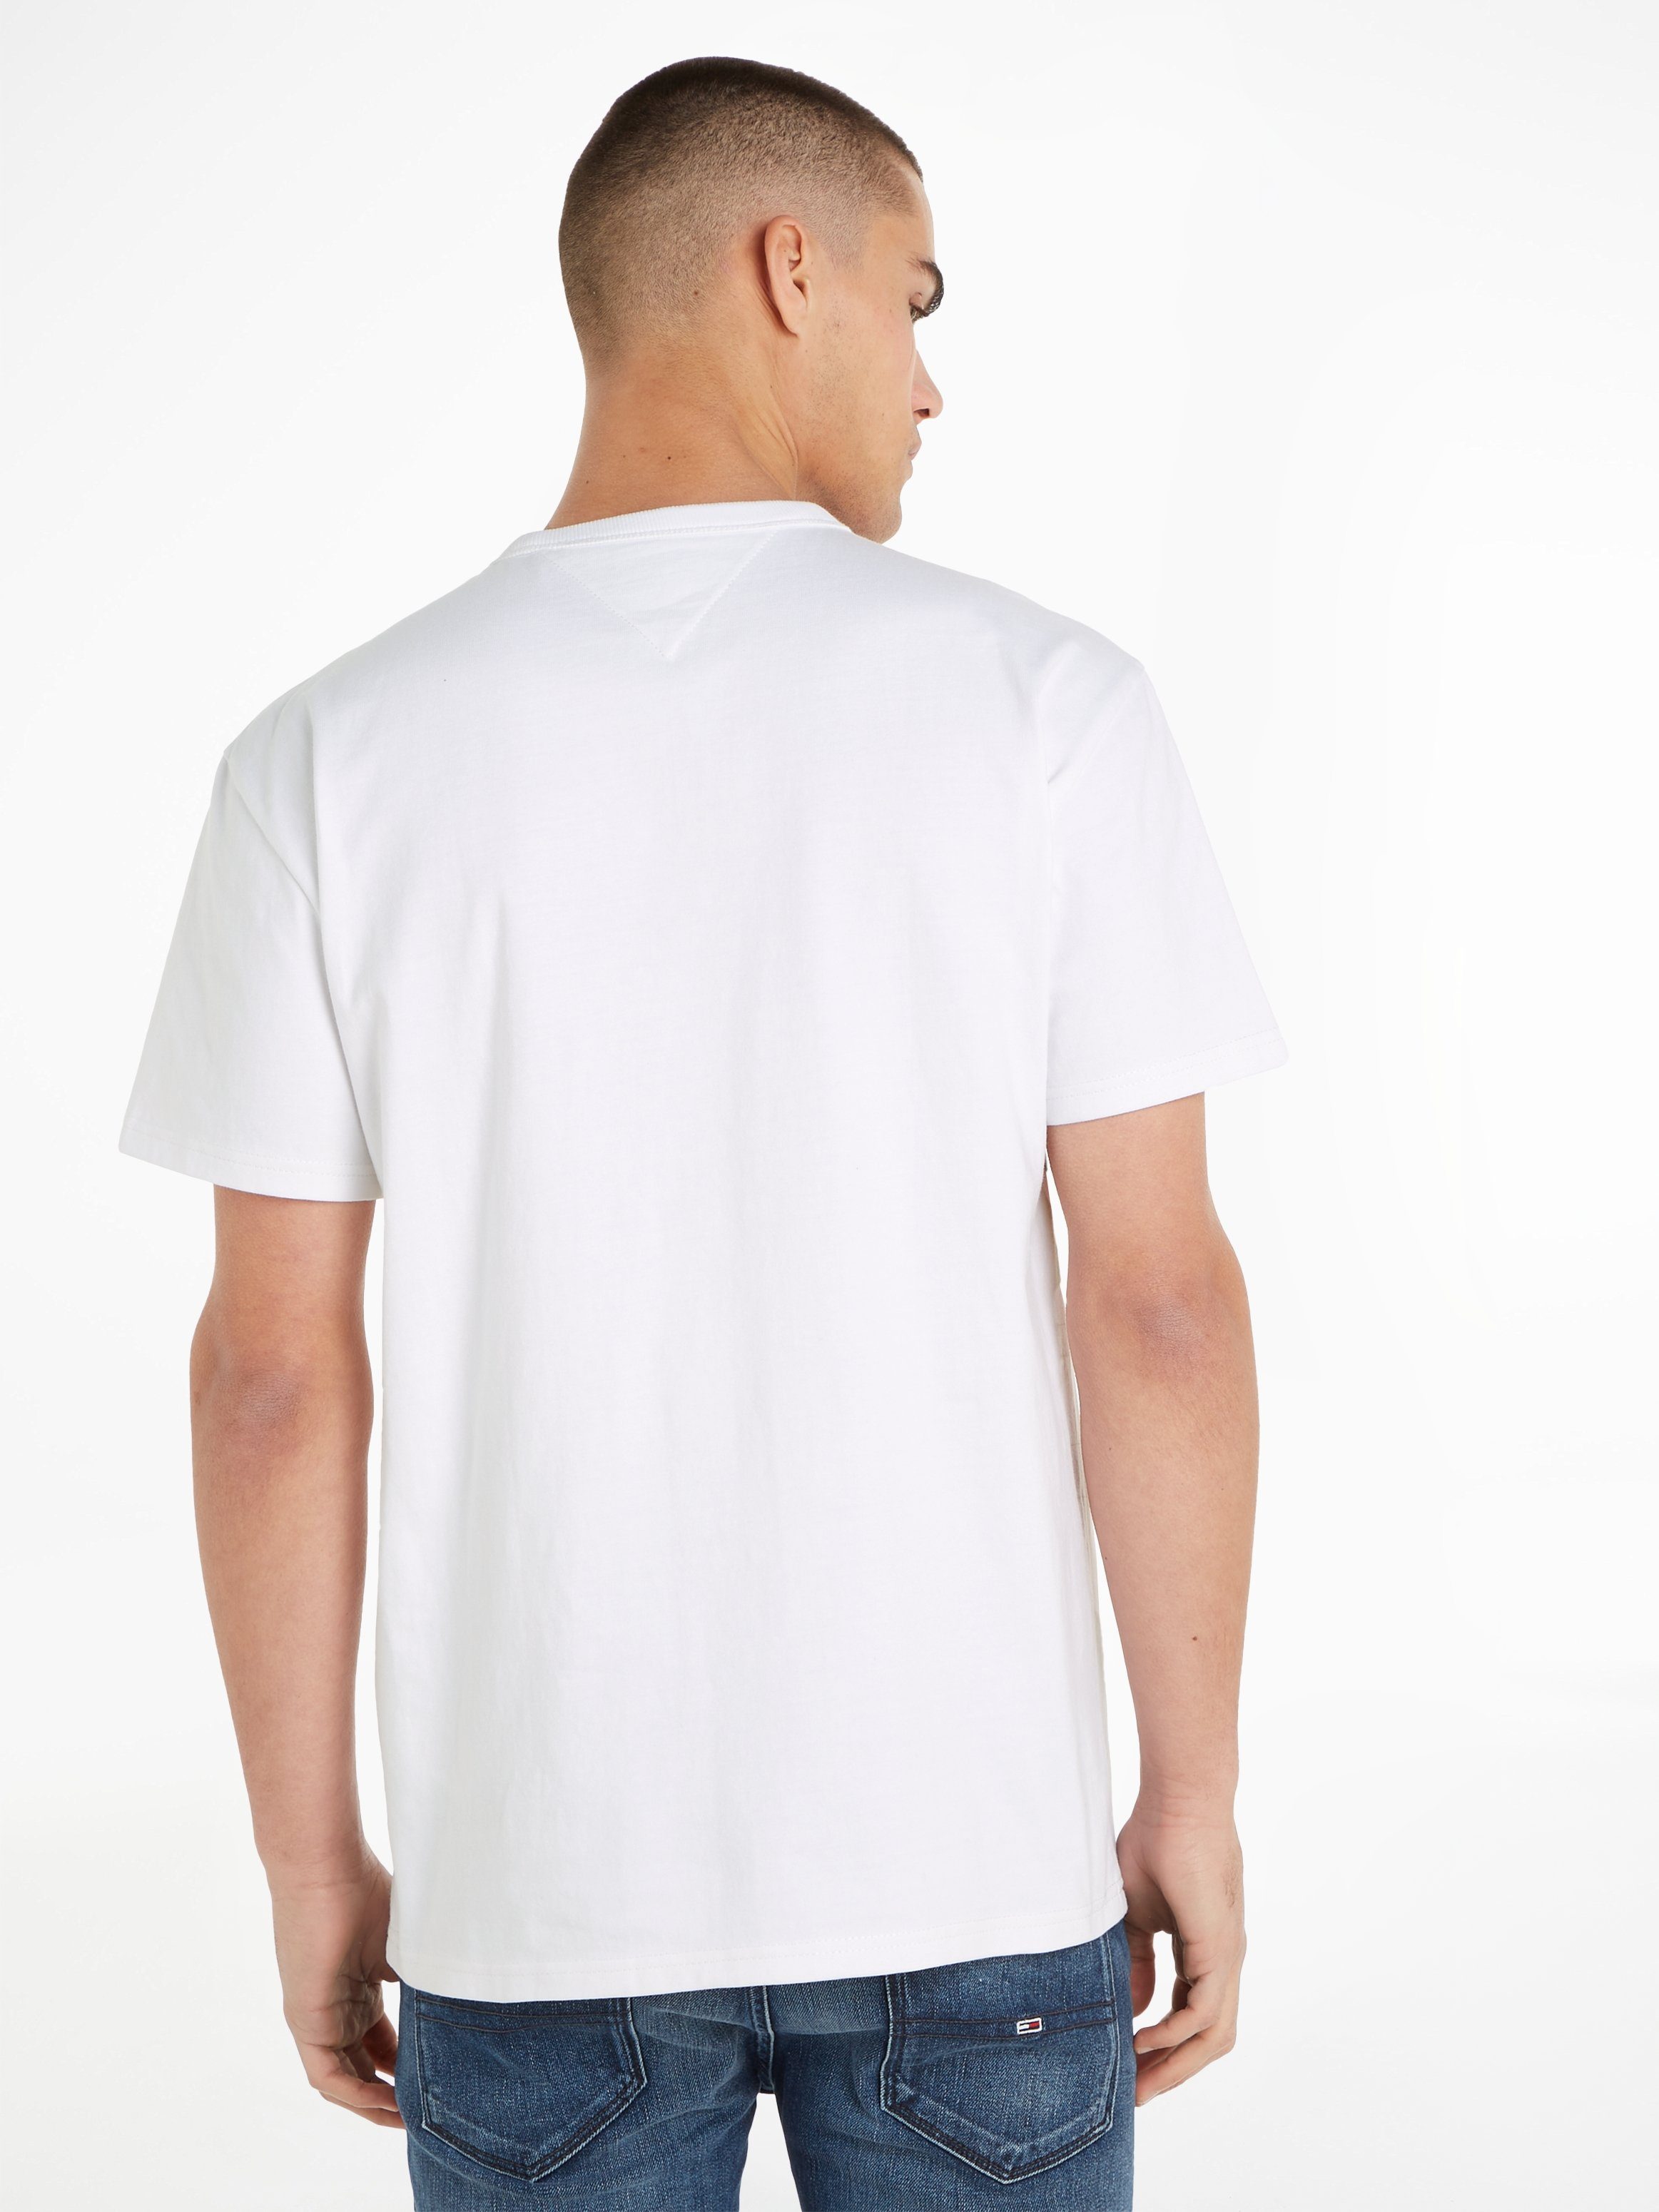 TOMMY Jeans White XS CLSC TJM BADGE TEE T-Shirt Tommy